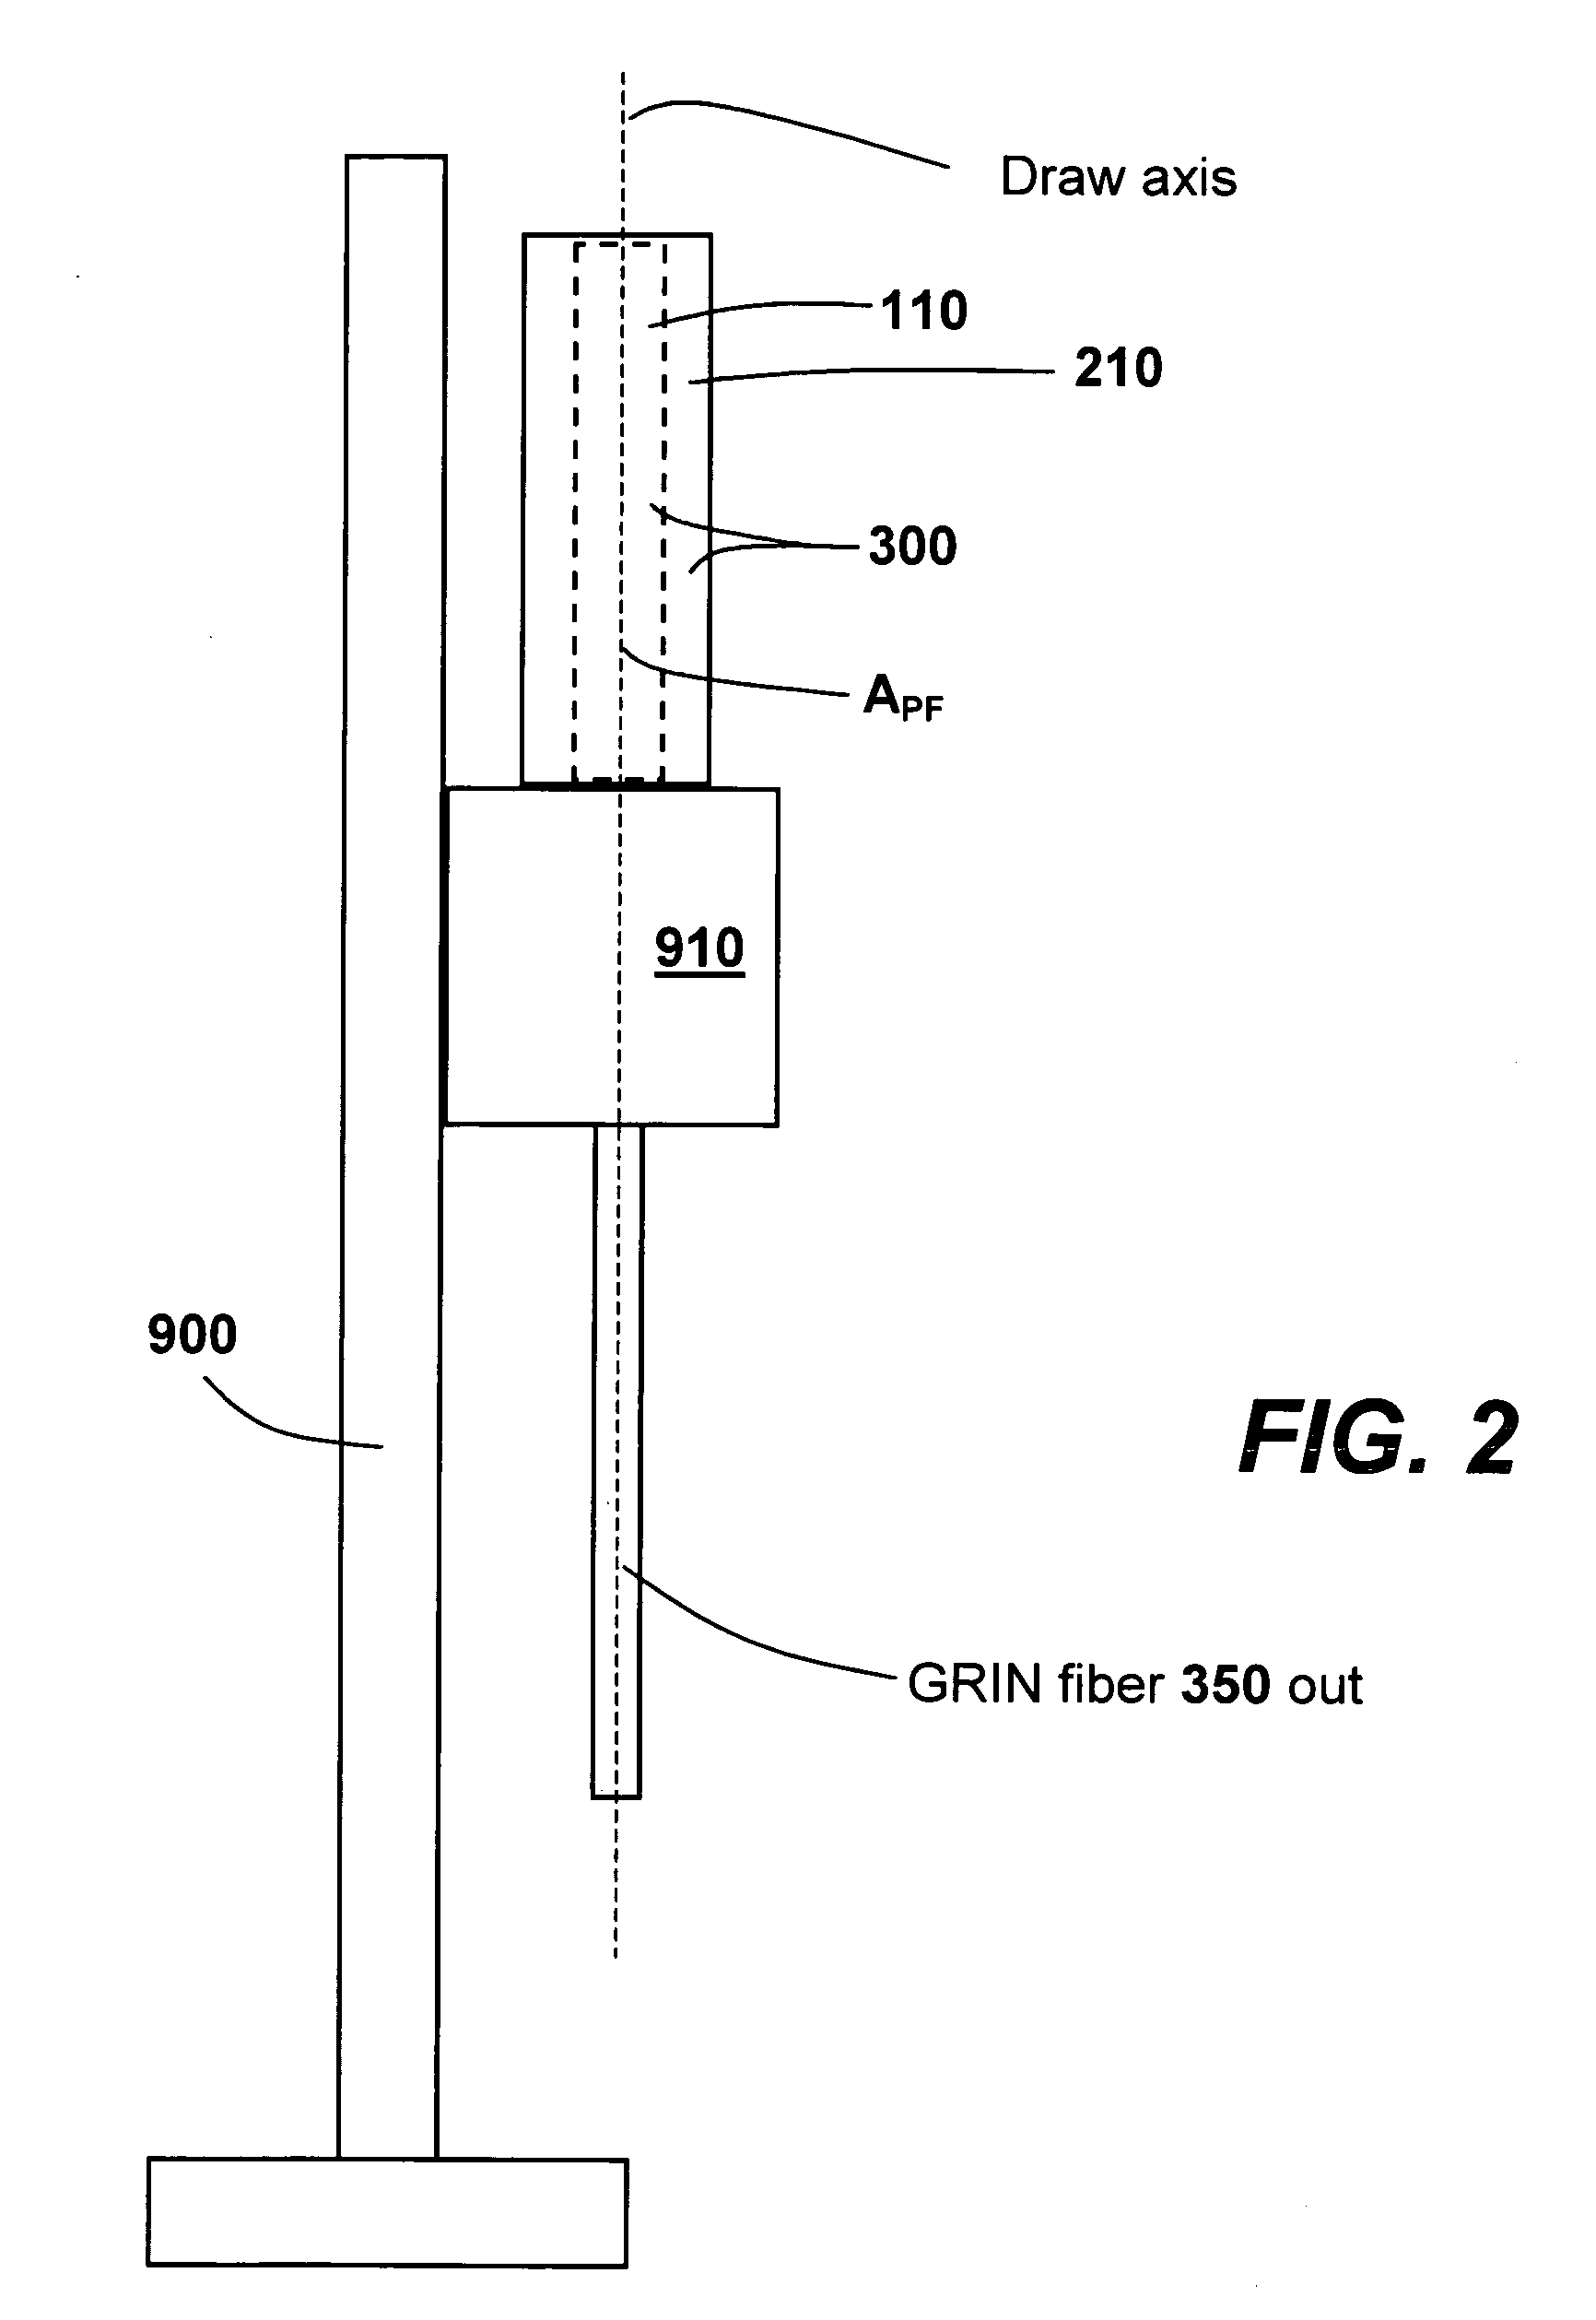 Graded refractive index optical fibers, optical components fabricated to include plural graded index optical fibers and methods of fabricating the same